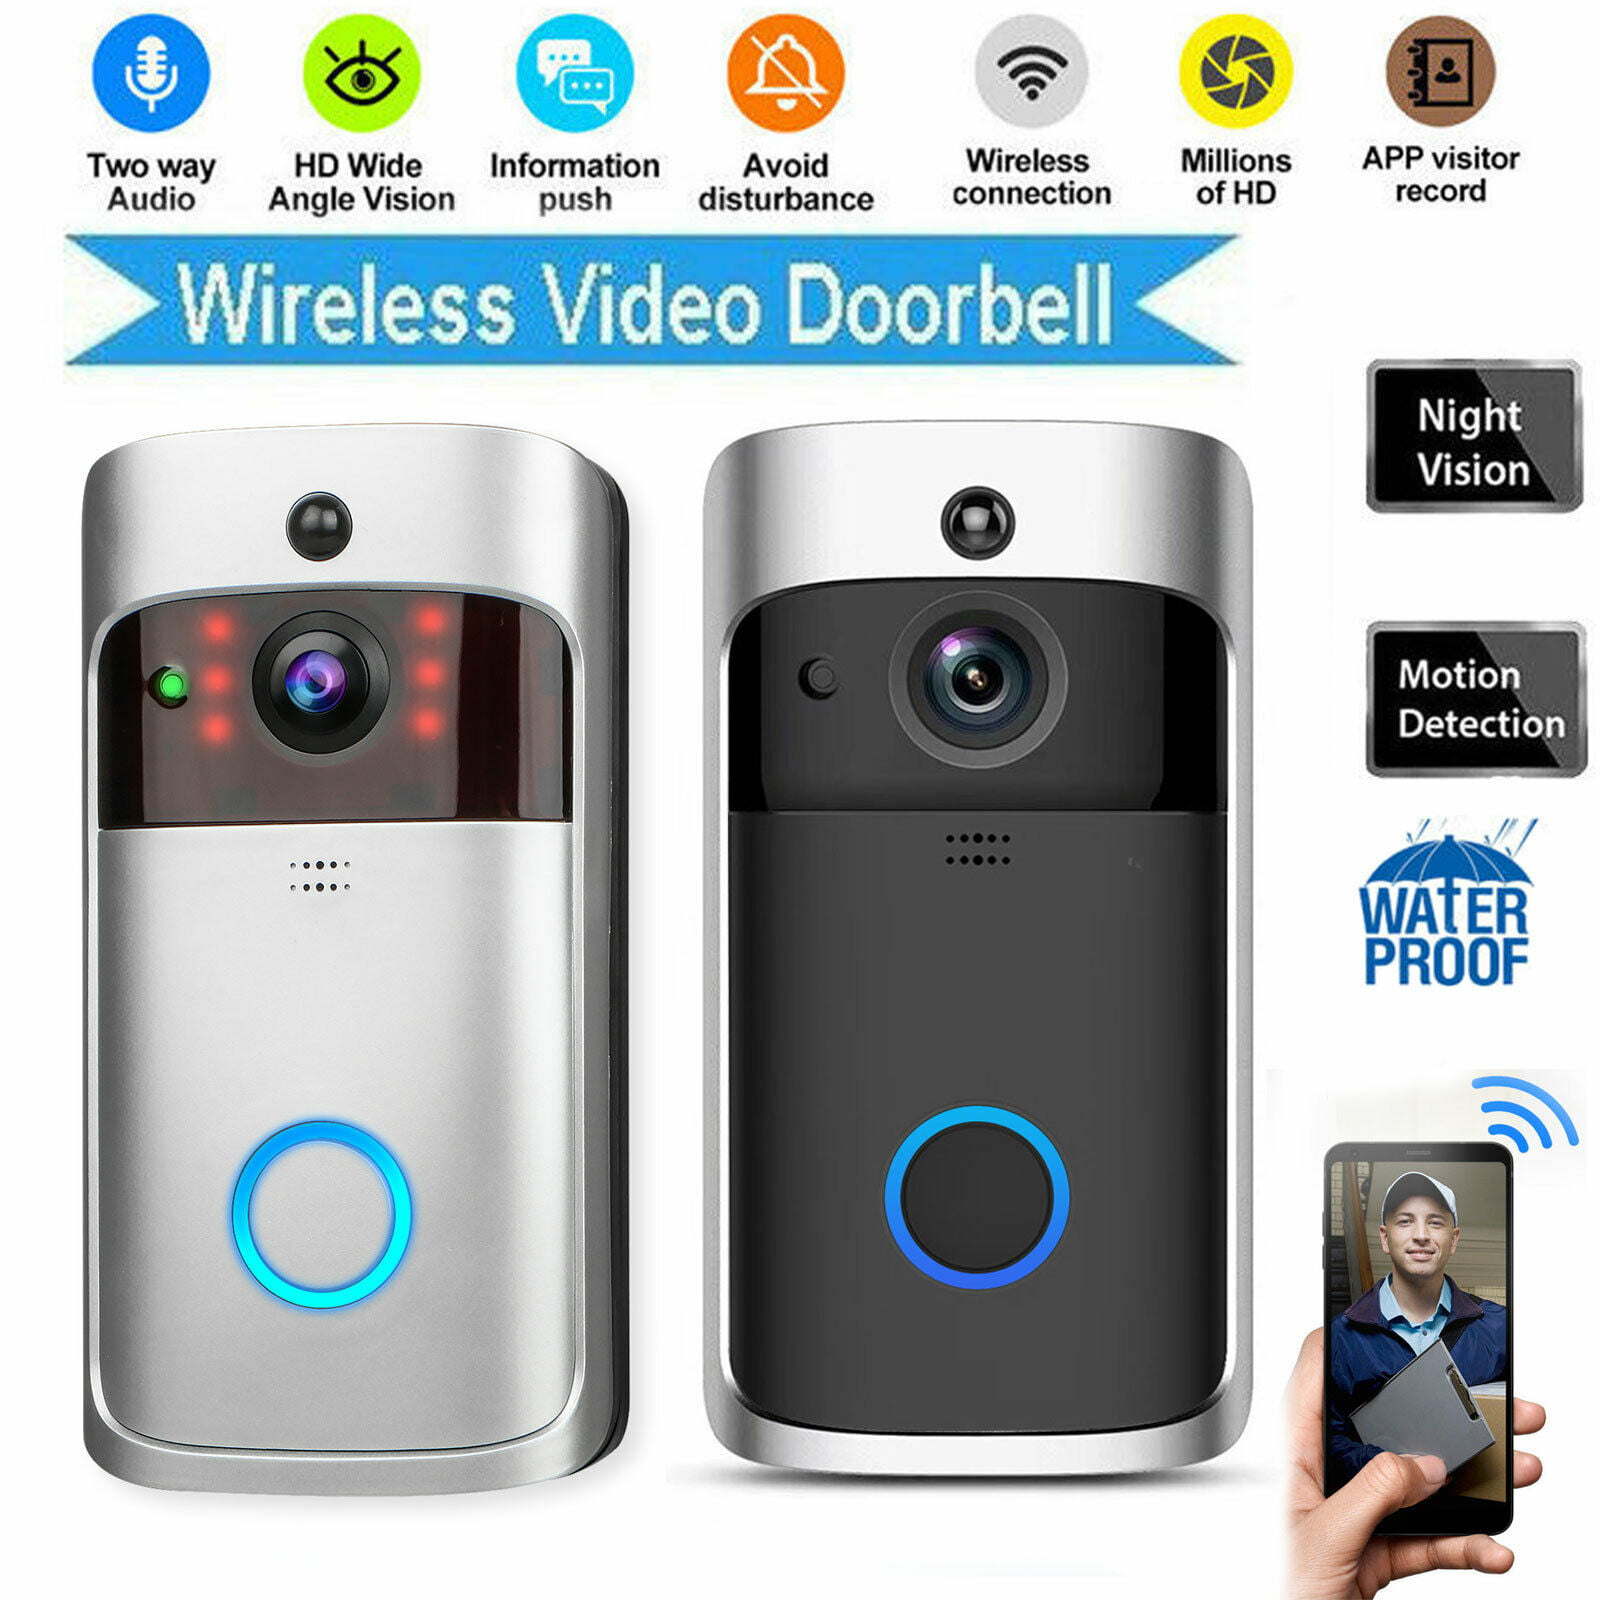 PIR Motion Detection App Control for iOS and Android Night Vision Video Doorbell GEREE WiFi Smart Wireless Doorbell 720P HD Security Home Camera Real-Time Video and Two-Way Talk 